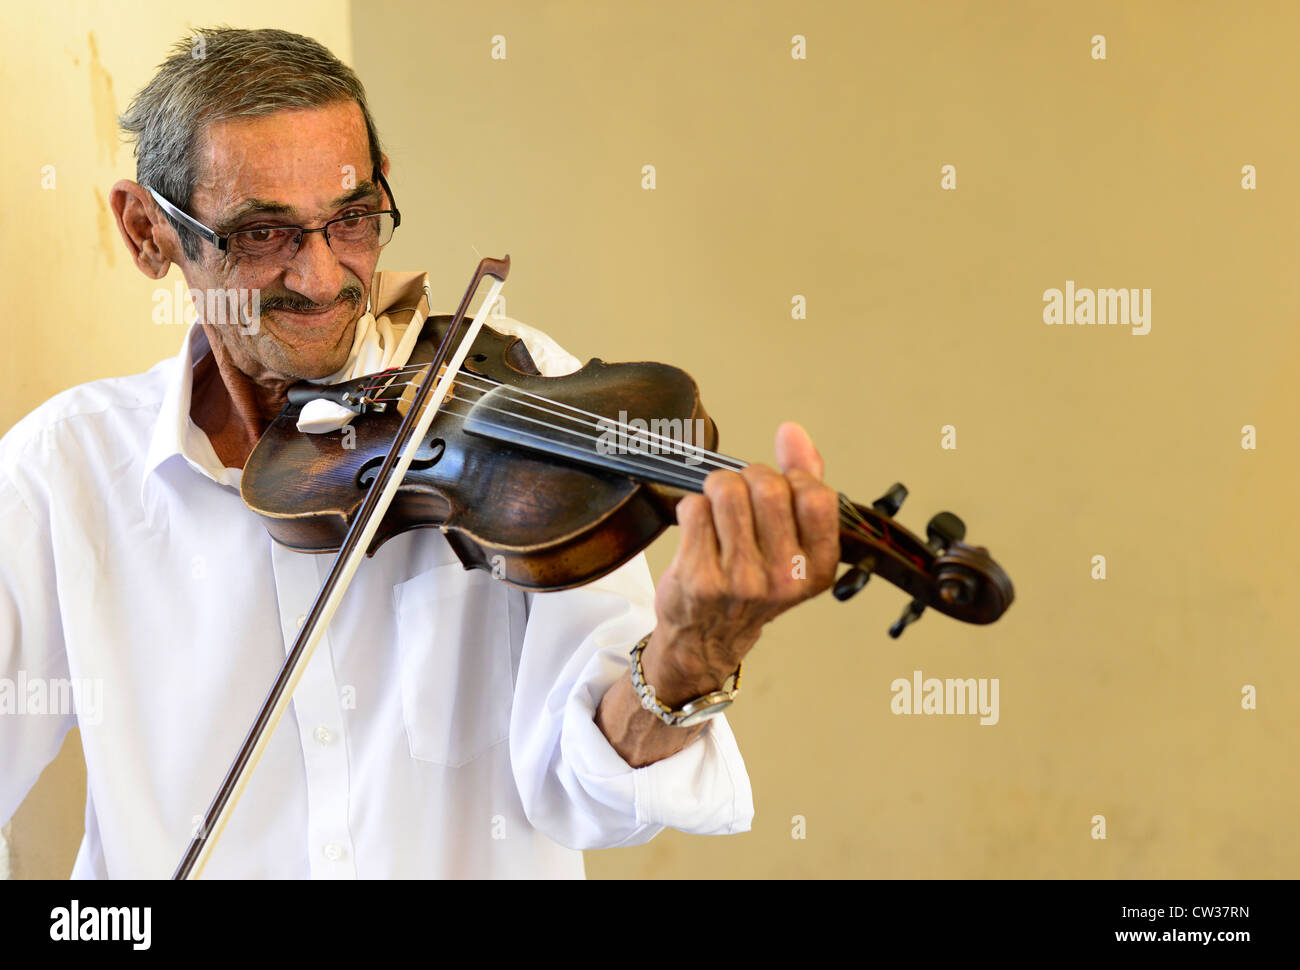 A Gypsy man ( Roma ) playing his violin in the old town of Bratislava, Slovakia. Stock Photo